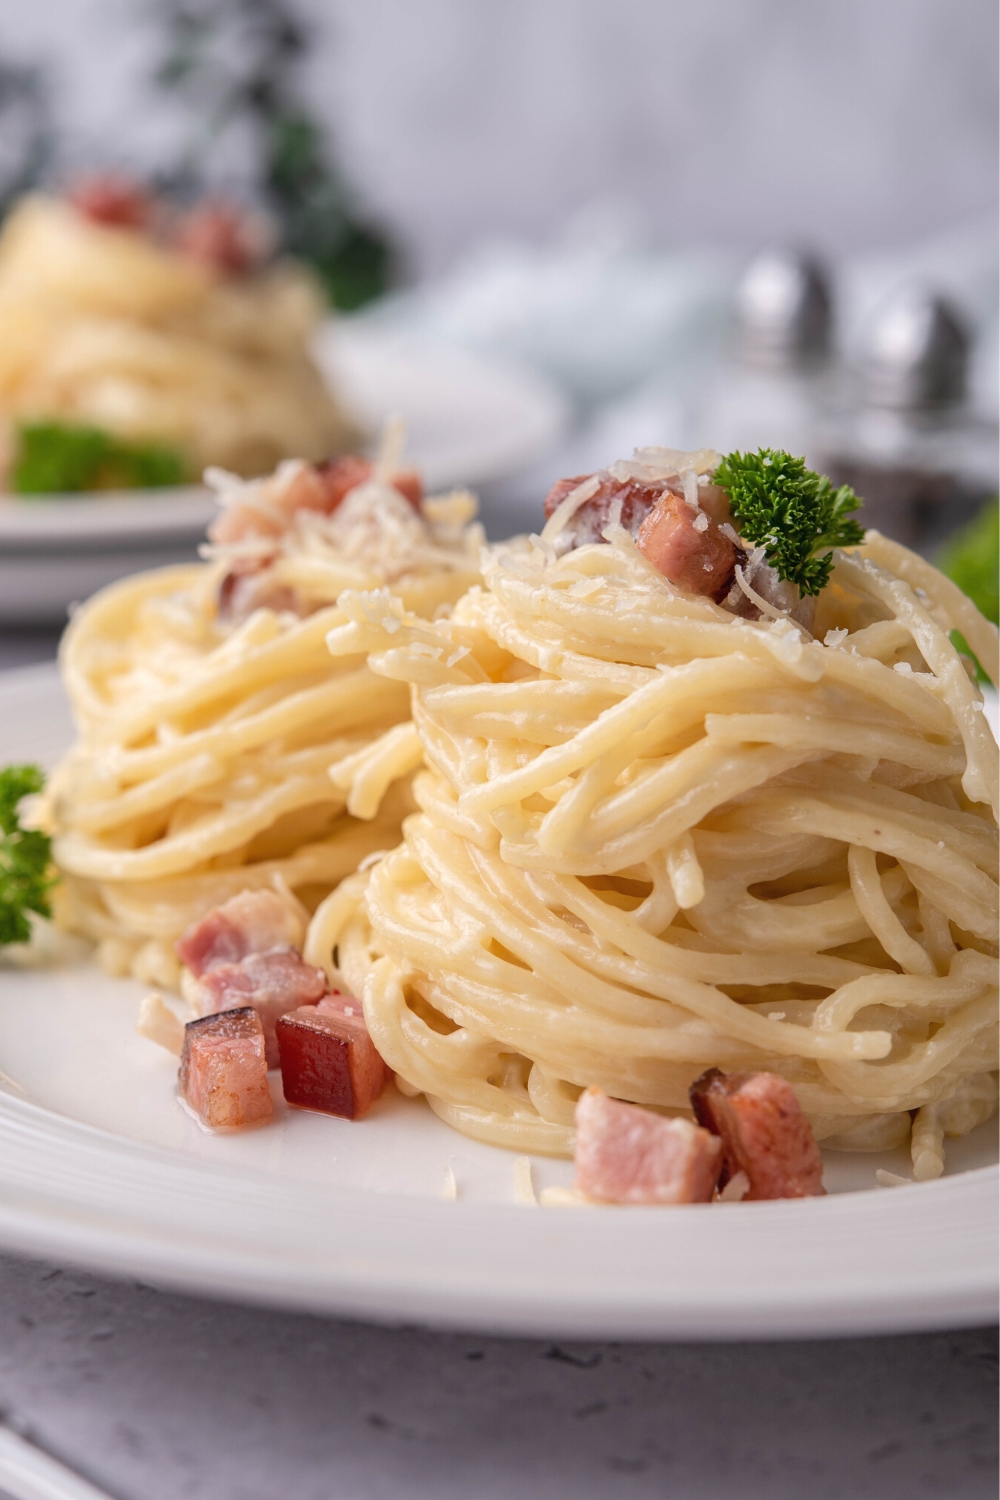 A bundle of spaghetti noodles with pancetta and Parmesan cheese on them with another pile of noodles behind it.